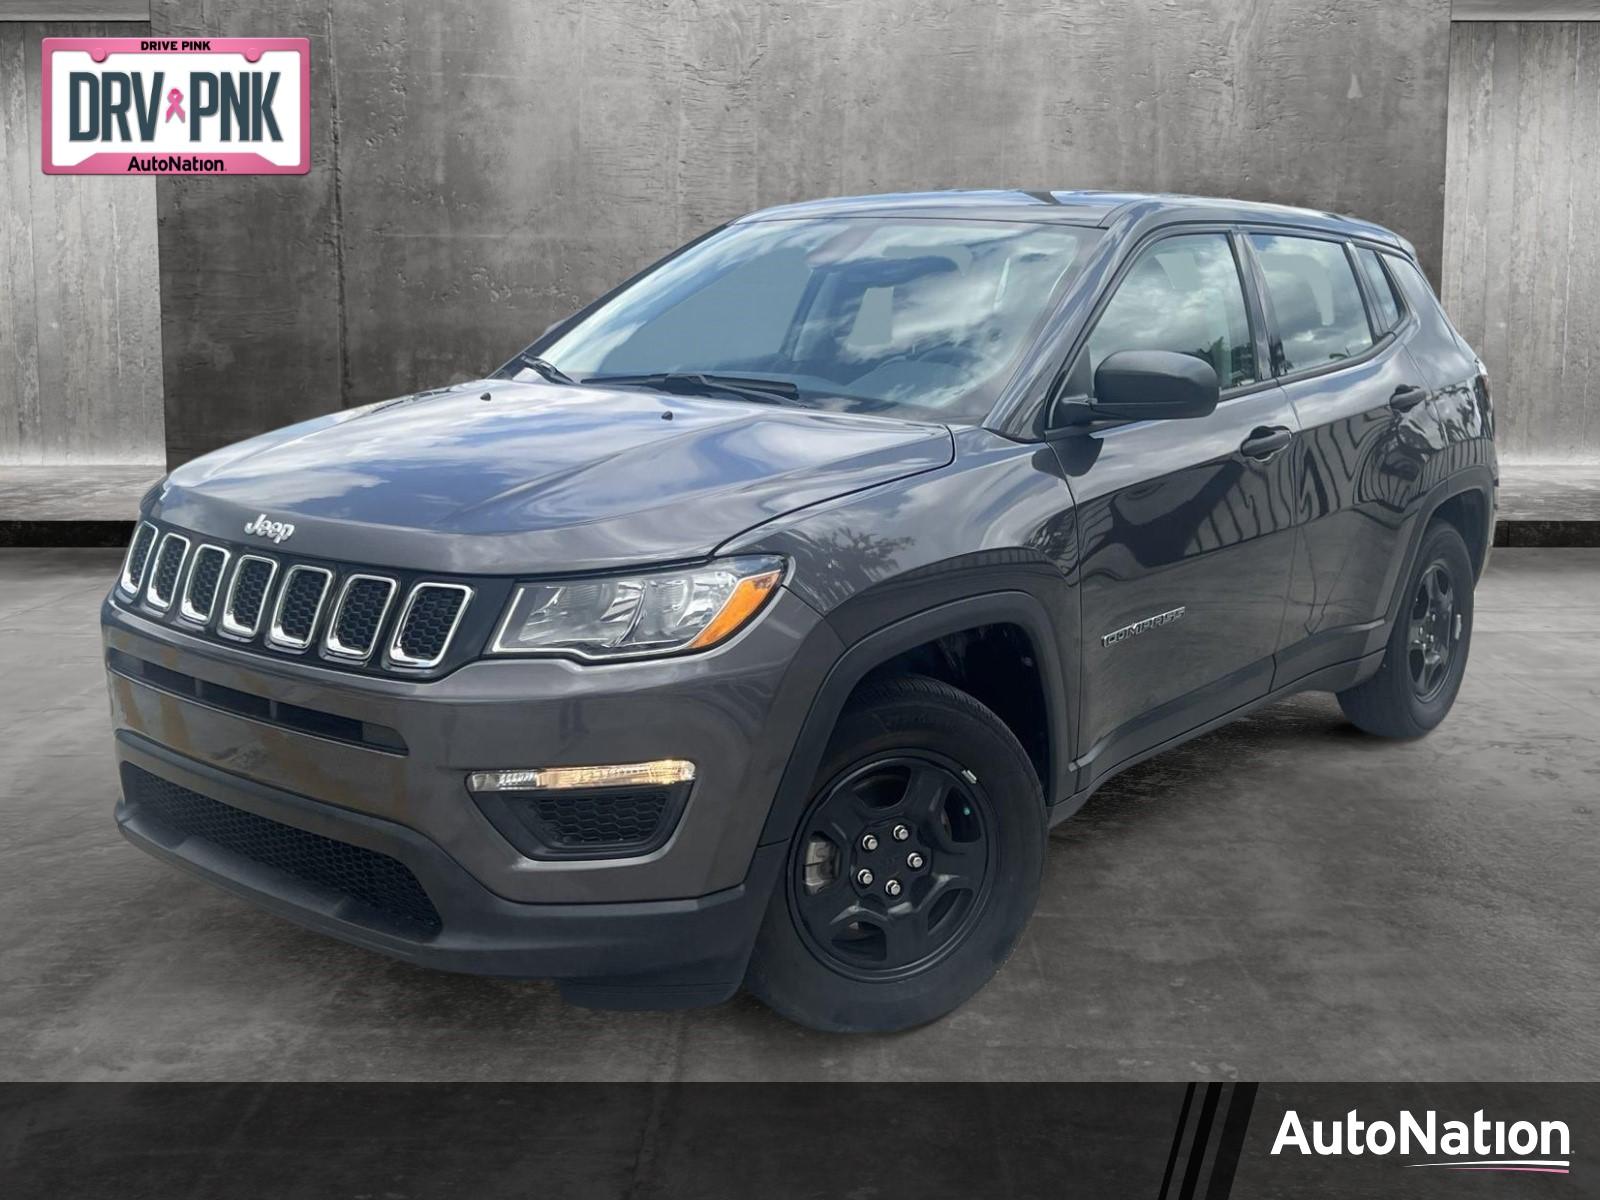 2021 Jeep Compass Vehicle Photo in Pembroke Pines, FL 33027